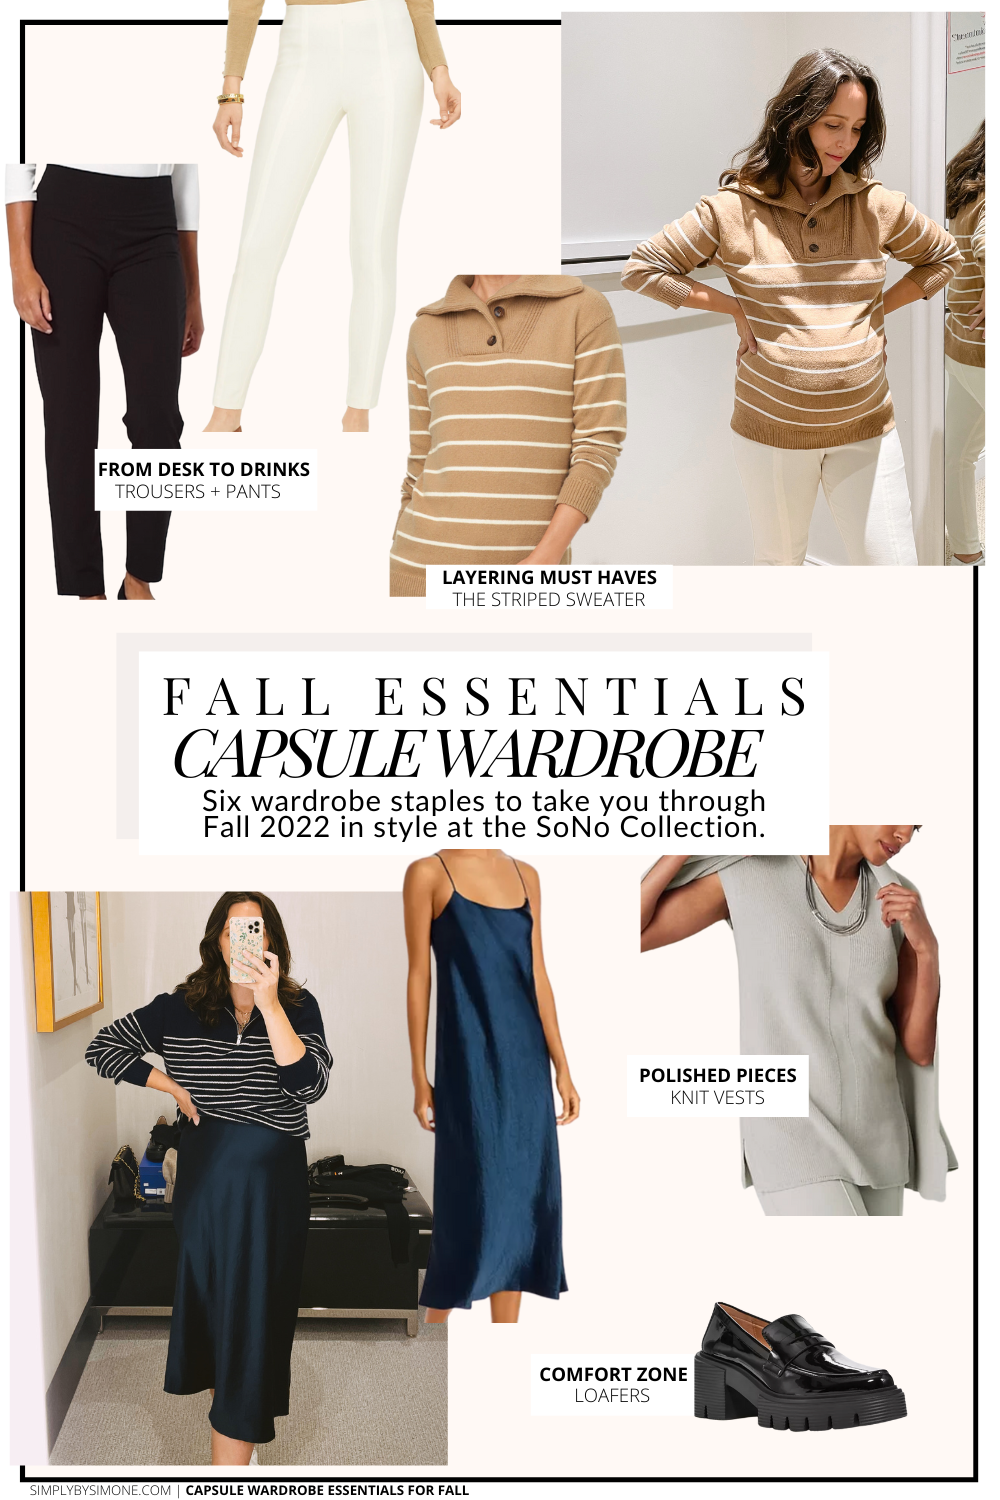 Capsule Wardrobe Essentials for Fall 2022 | The SoNo Collection Essential Capsule Wardrobe Items for Fall | 6 Essential Pieces | How to Build a Capsule Wardrobe | Fall Clothes | Outfit Inspiration | Fall Weather Outfit Ideas | Fall Vacation Packing Guide | Fall Capsule Wardrobe - What To Wear This Fall 2022 | Parisian Outfit Ideas | Cover Image | Simply by Simone